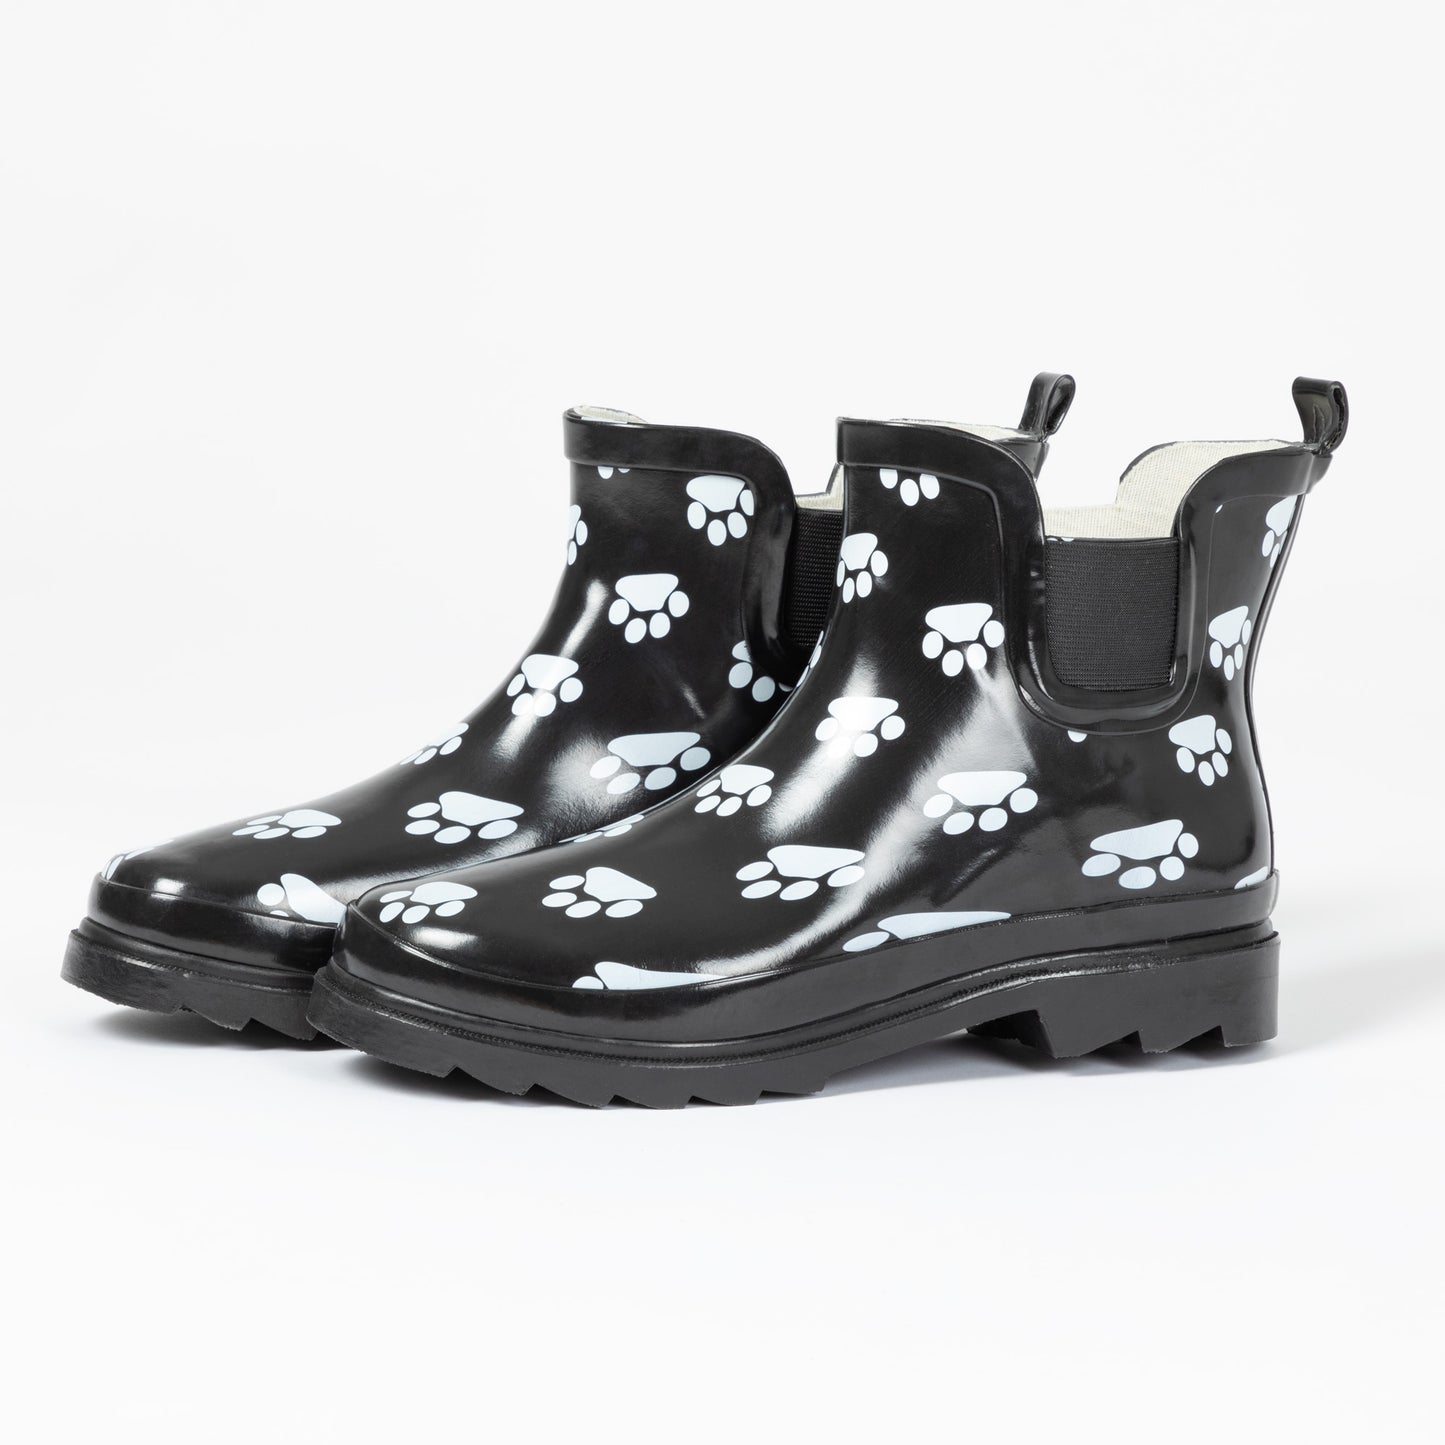 Dogs & Paws Rain Boots